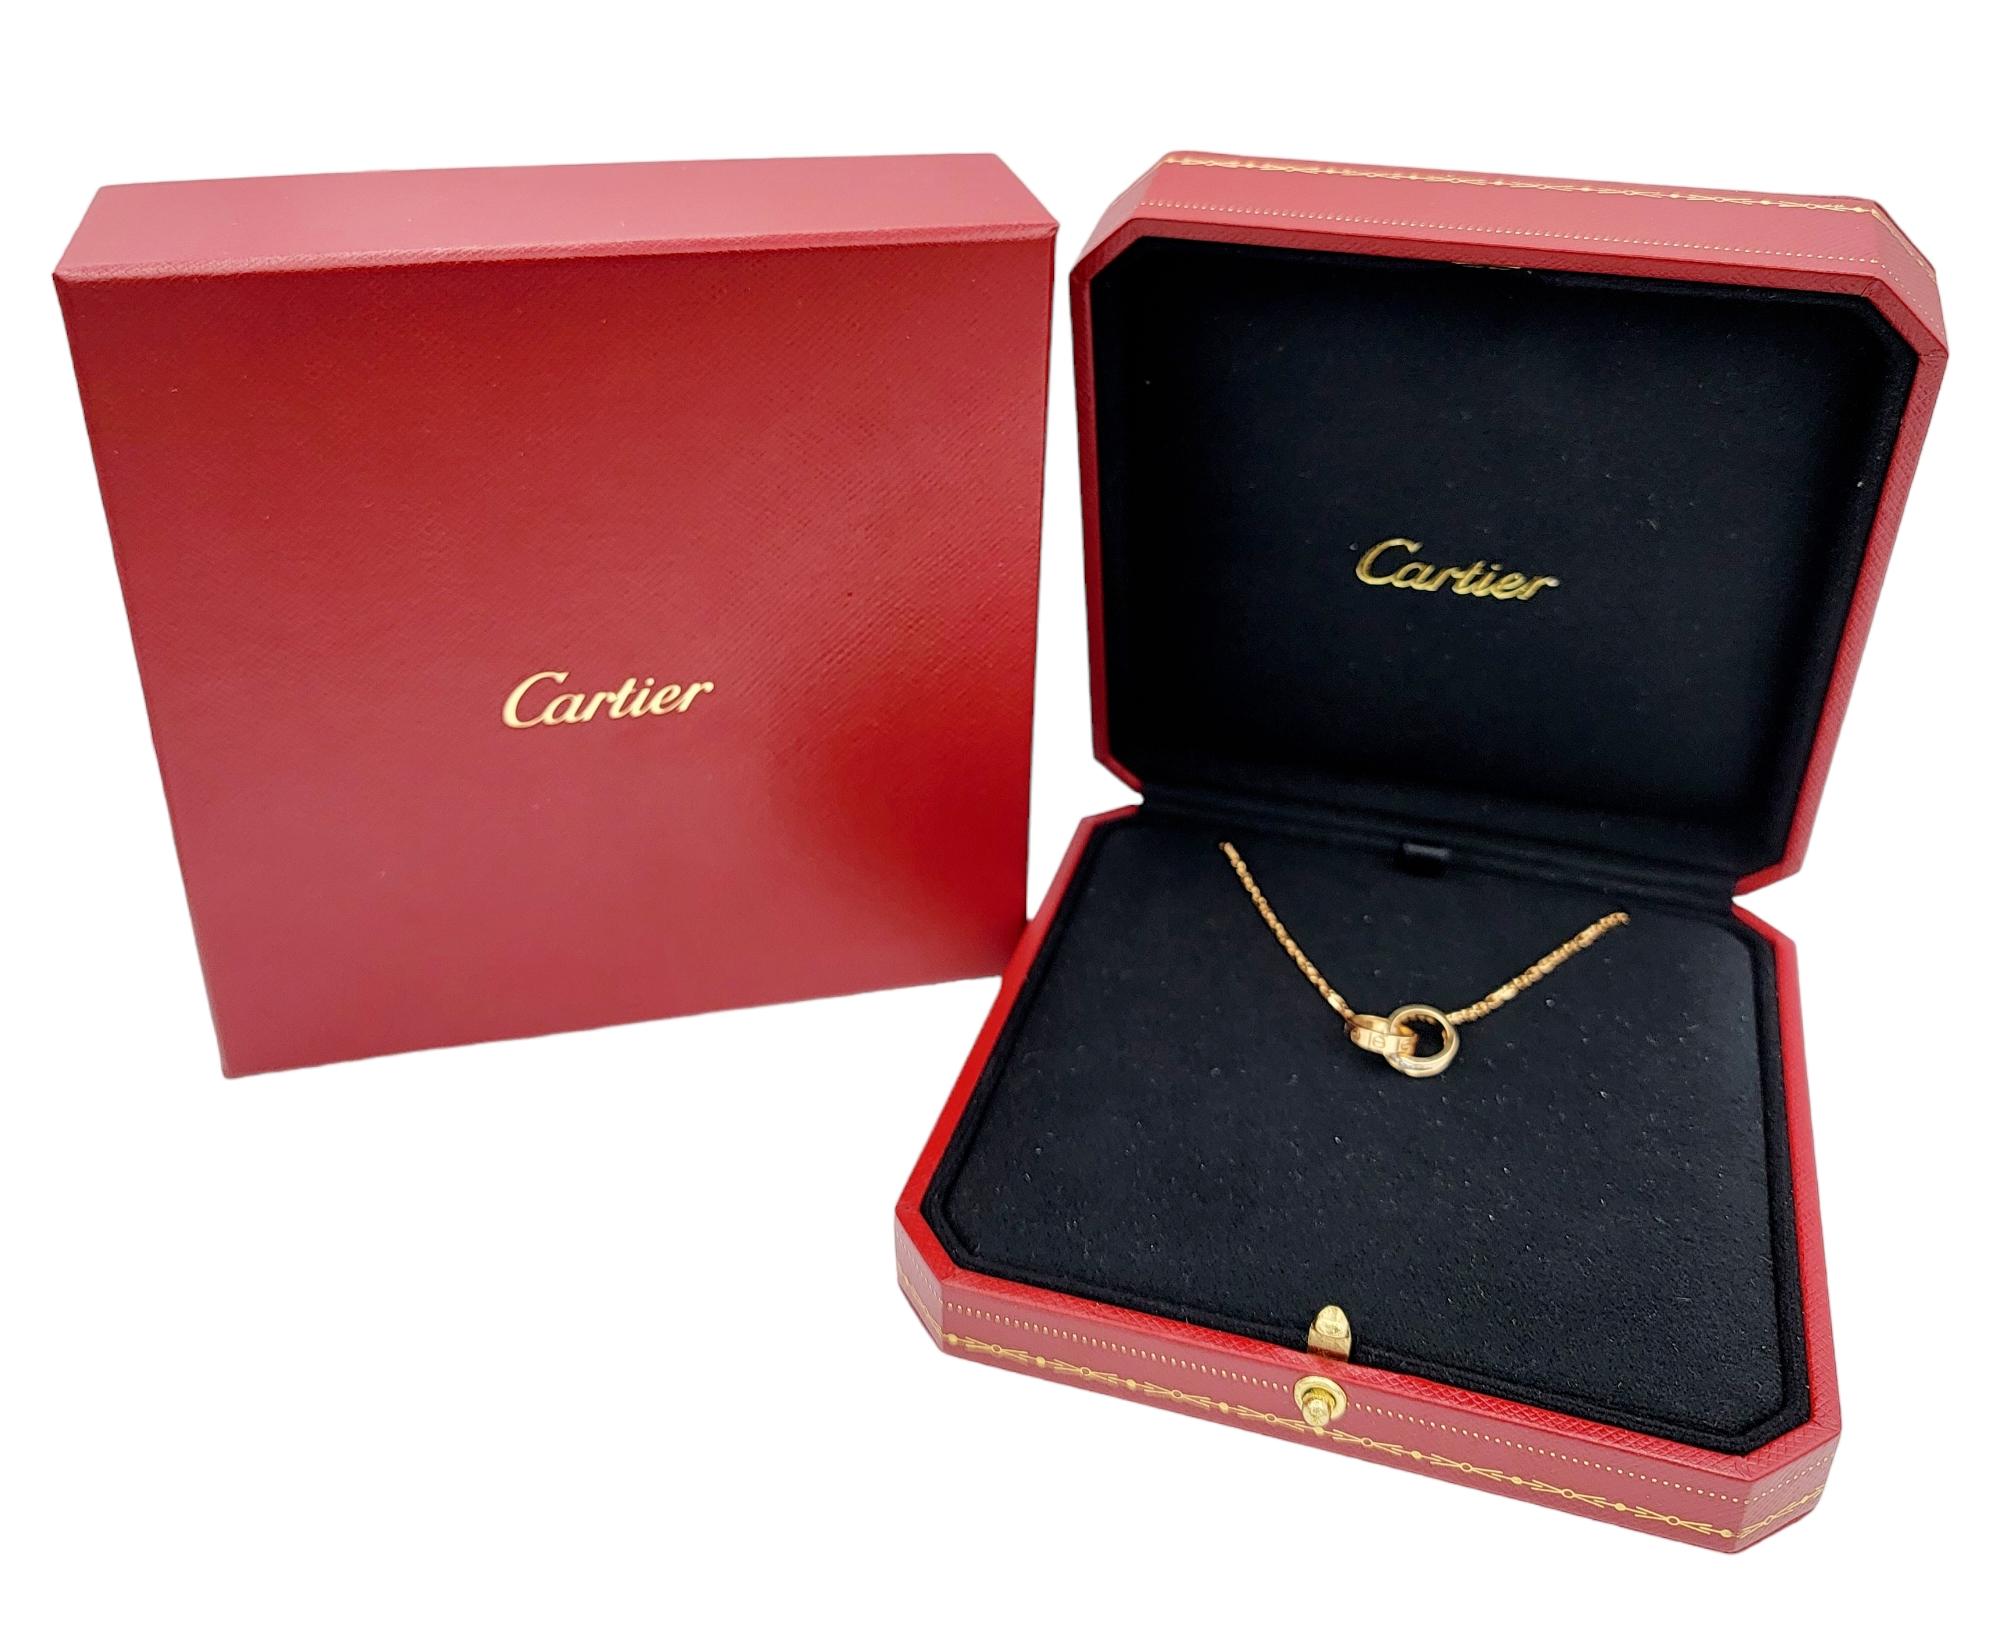 Cartier Interlocking Ring Love Necklace with Diamonds in 18 Karat Pink Gold, Box For Sale 2